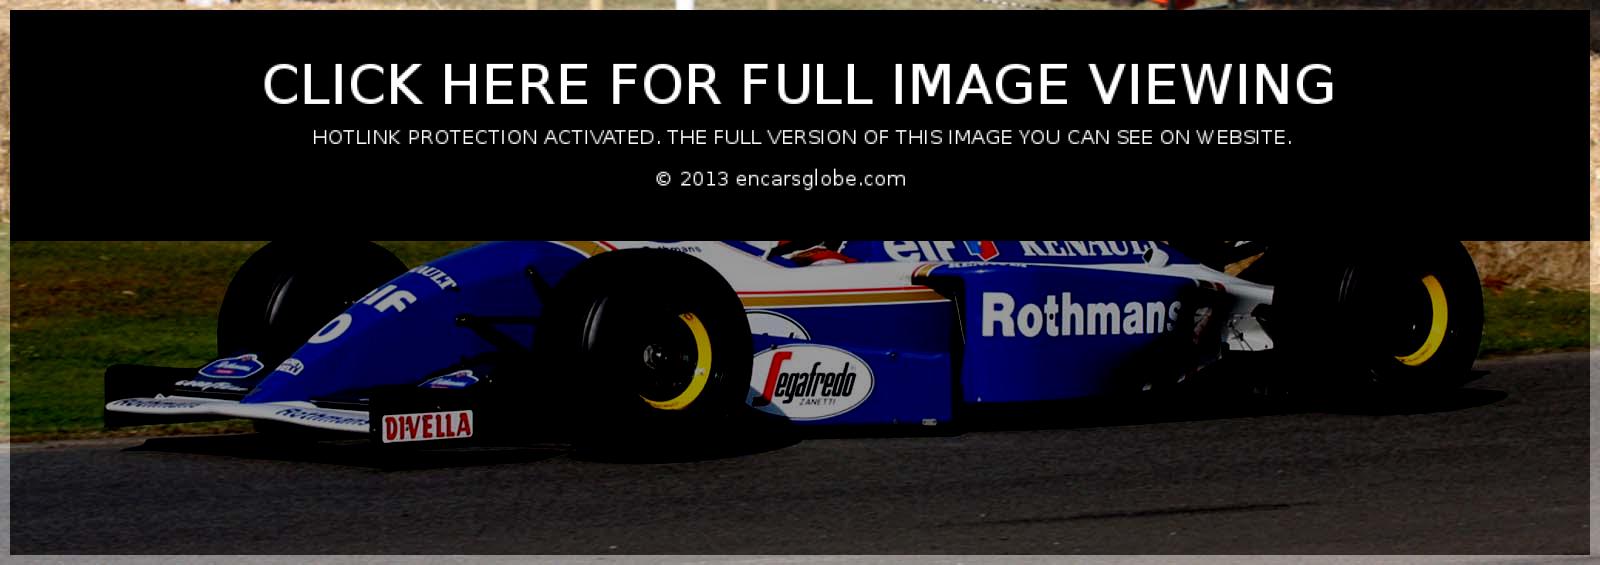 Williams FW16 B Photo Gallery: Photo #07 out of 11, Image Size ...